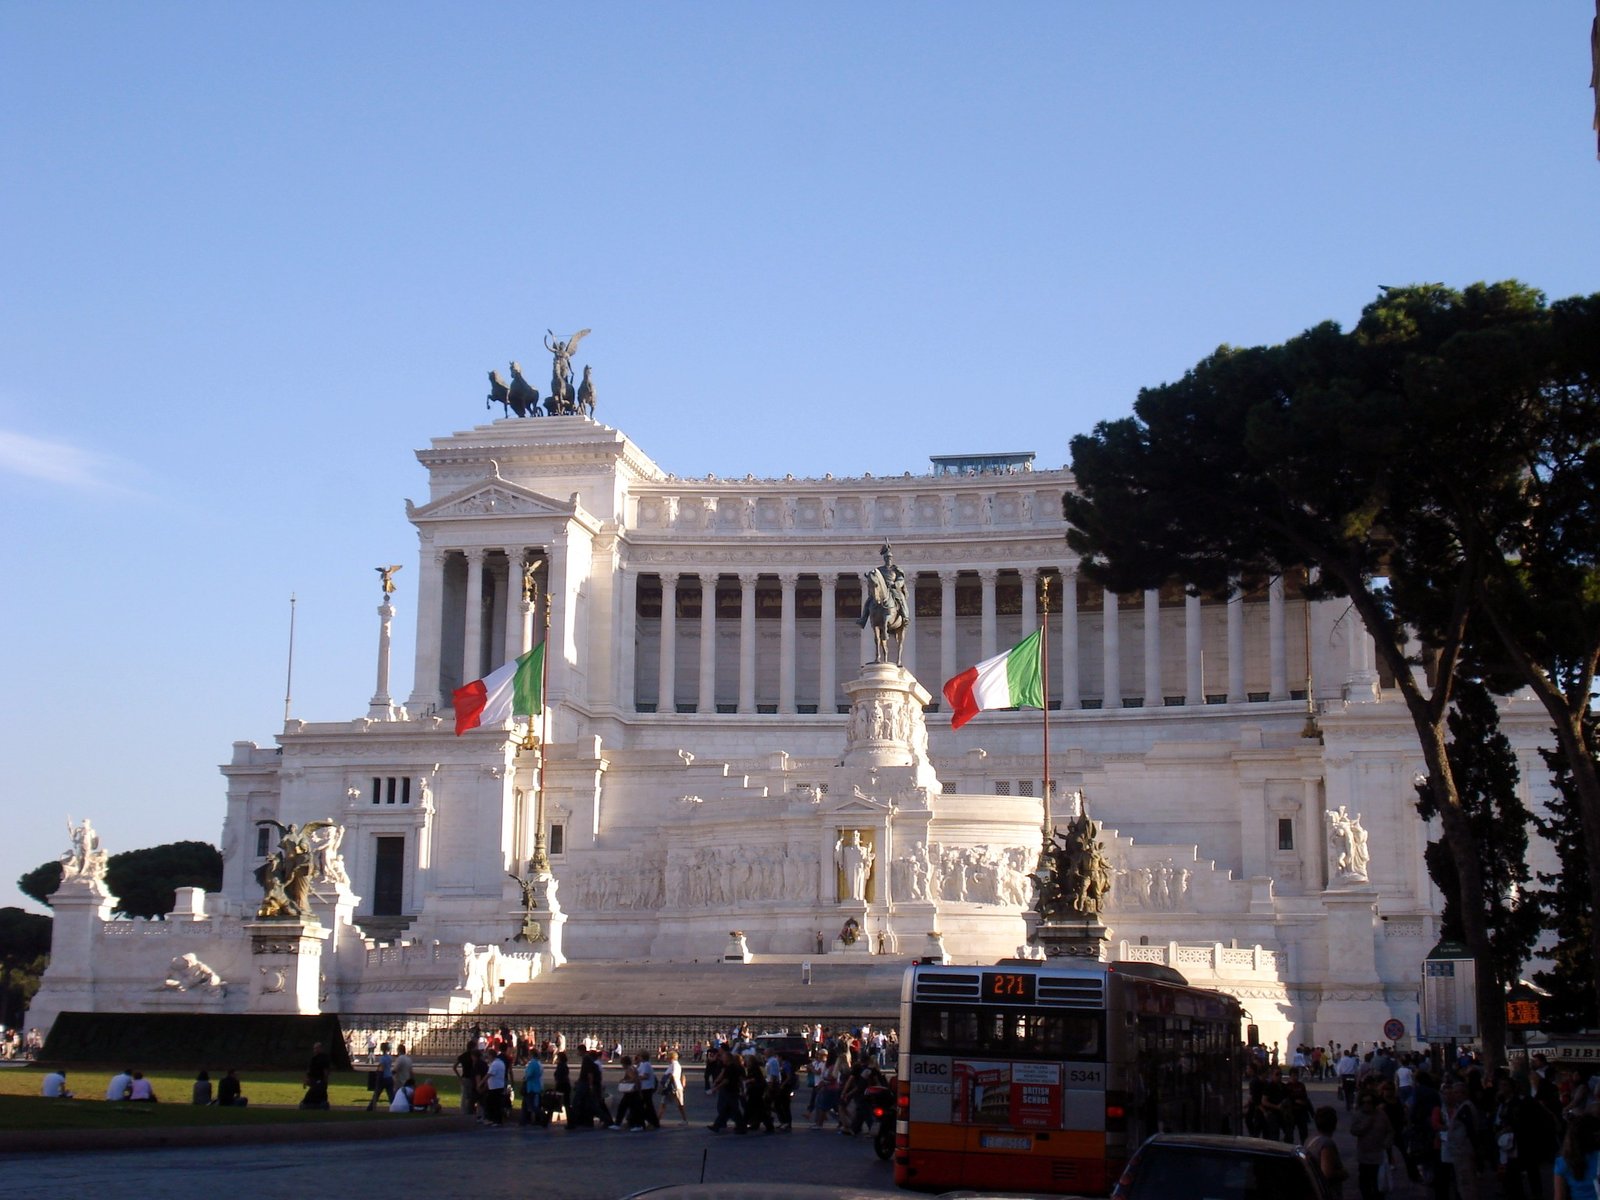 Victor Emmanuel Monument in Rome, Italy is one of our 17 amazing sites to check out when in Rome. Made of white marble is an amazing building.